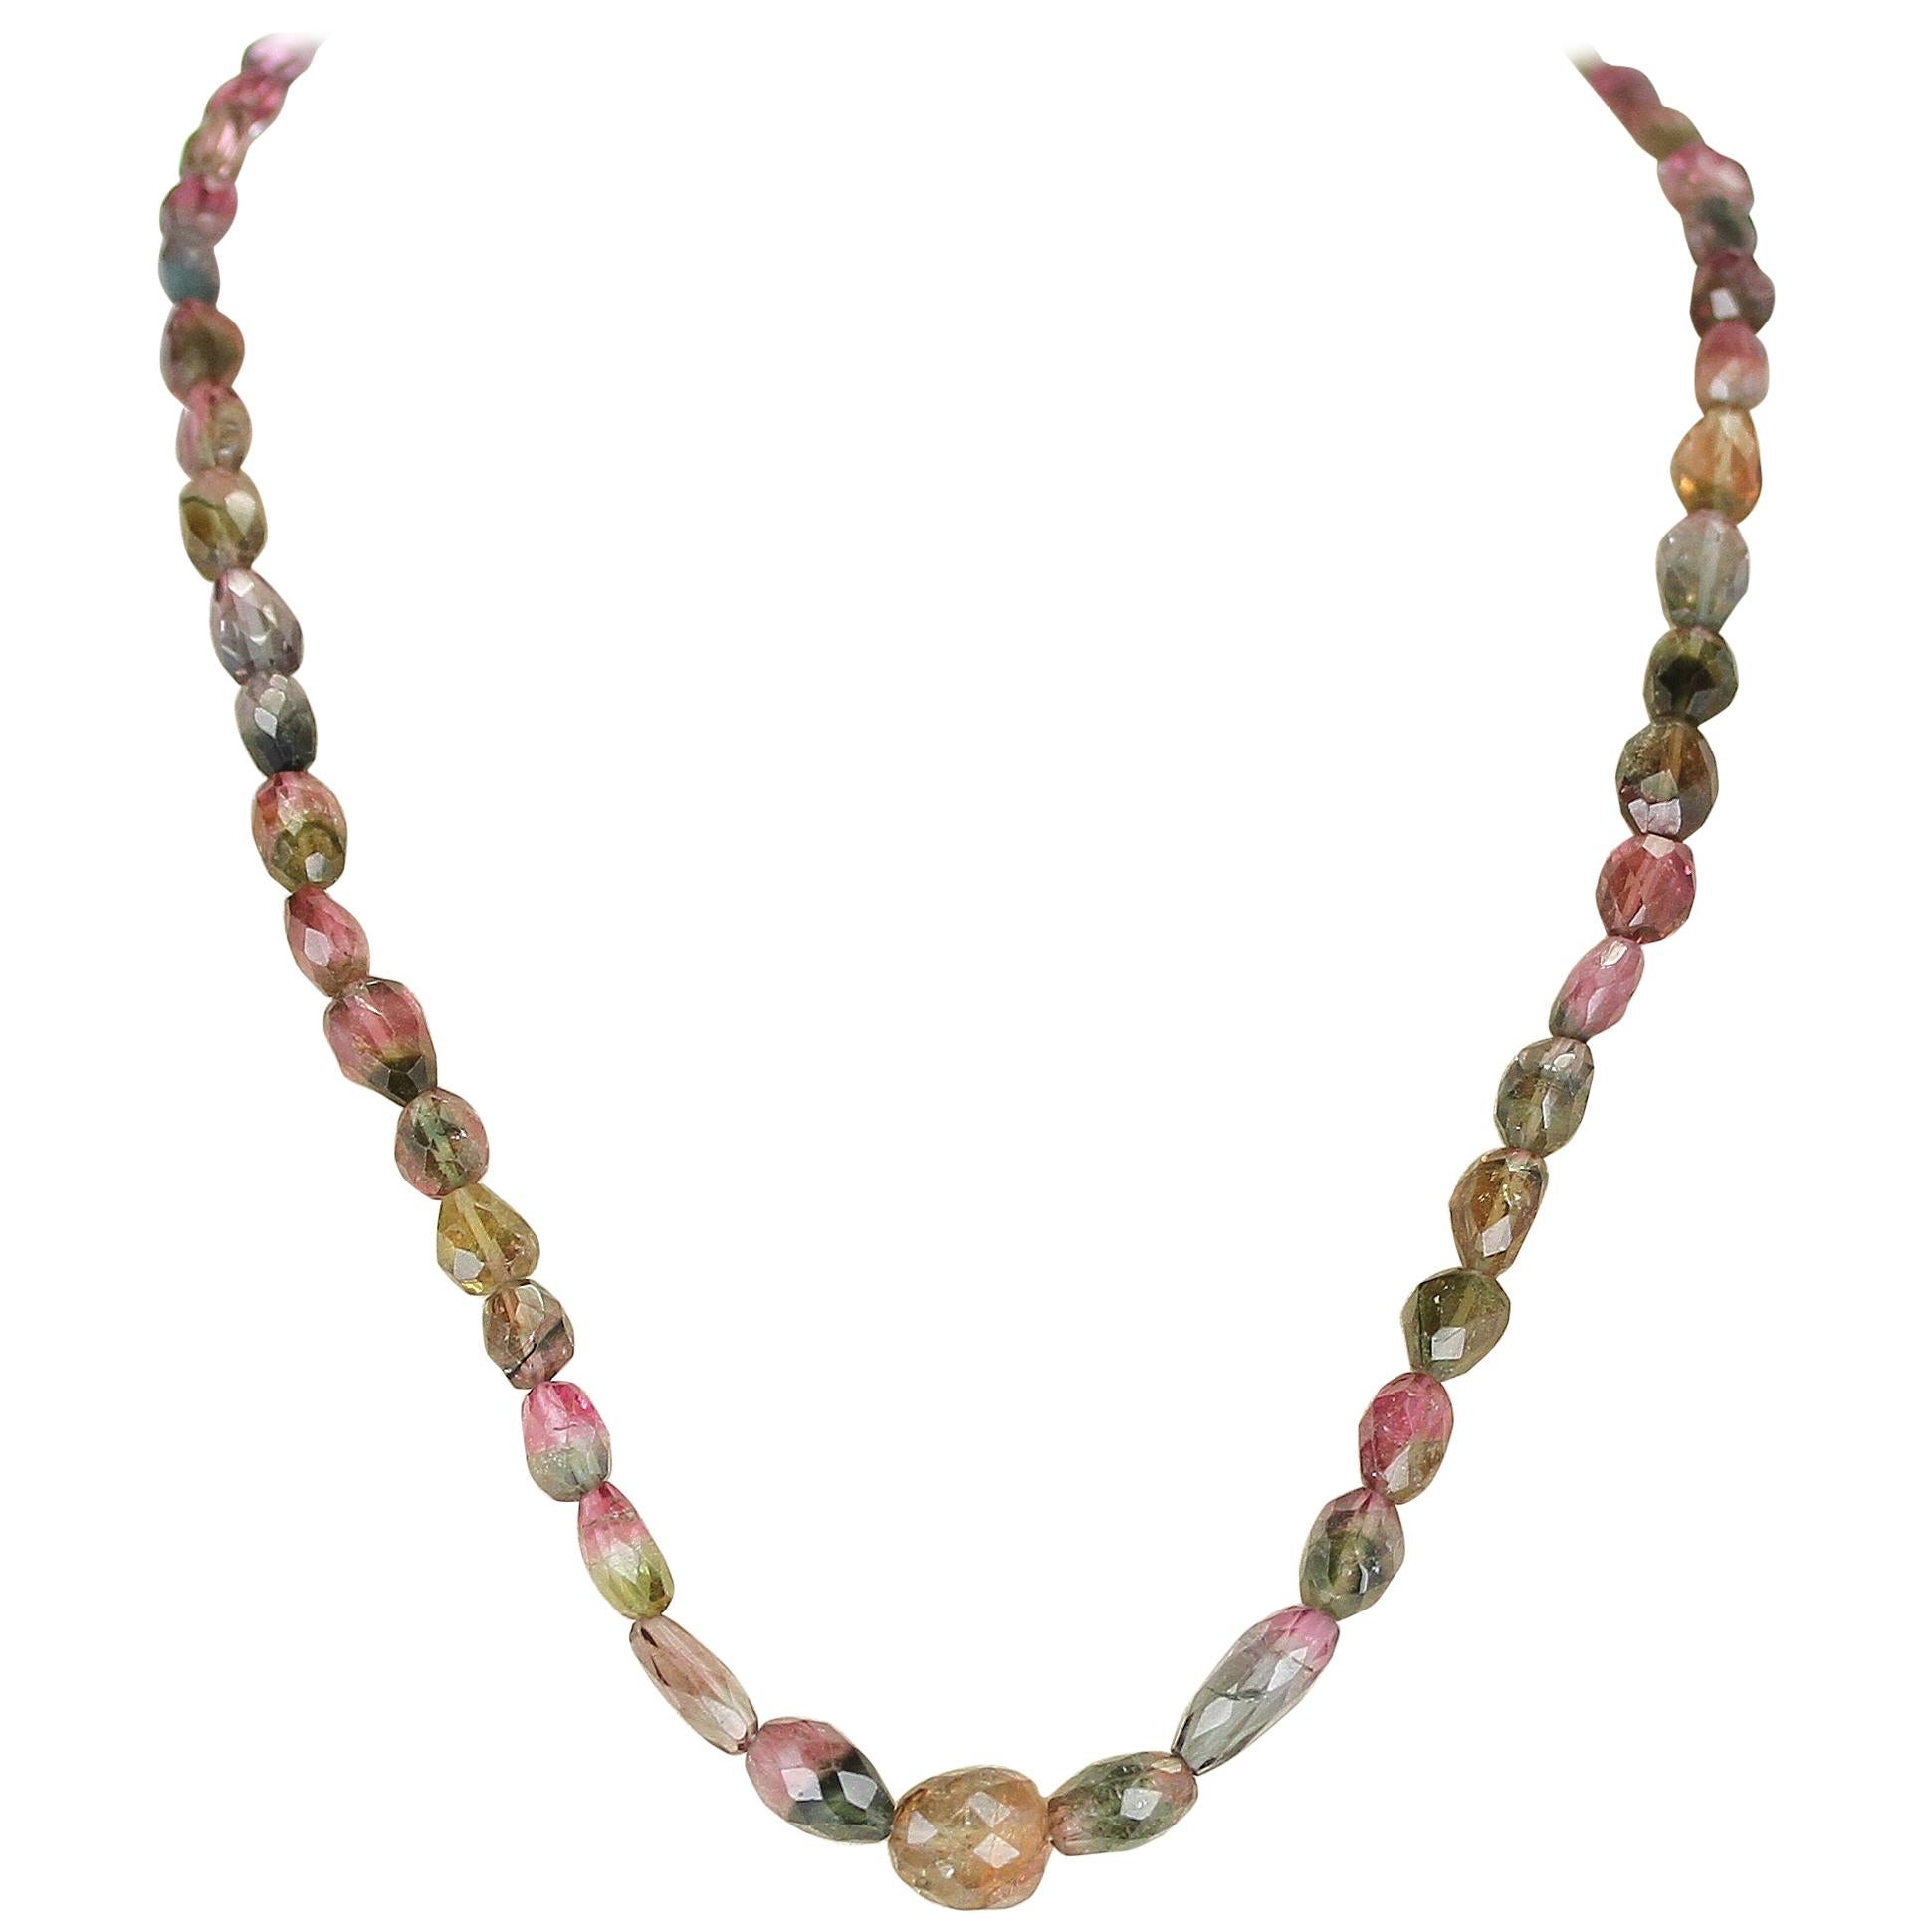 Genuine and Natural Watermelon Tourmaline Tumbled Faceted Beads Necklace